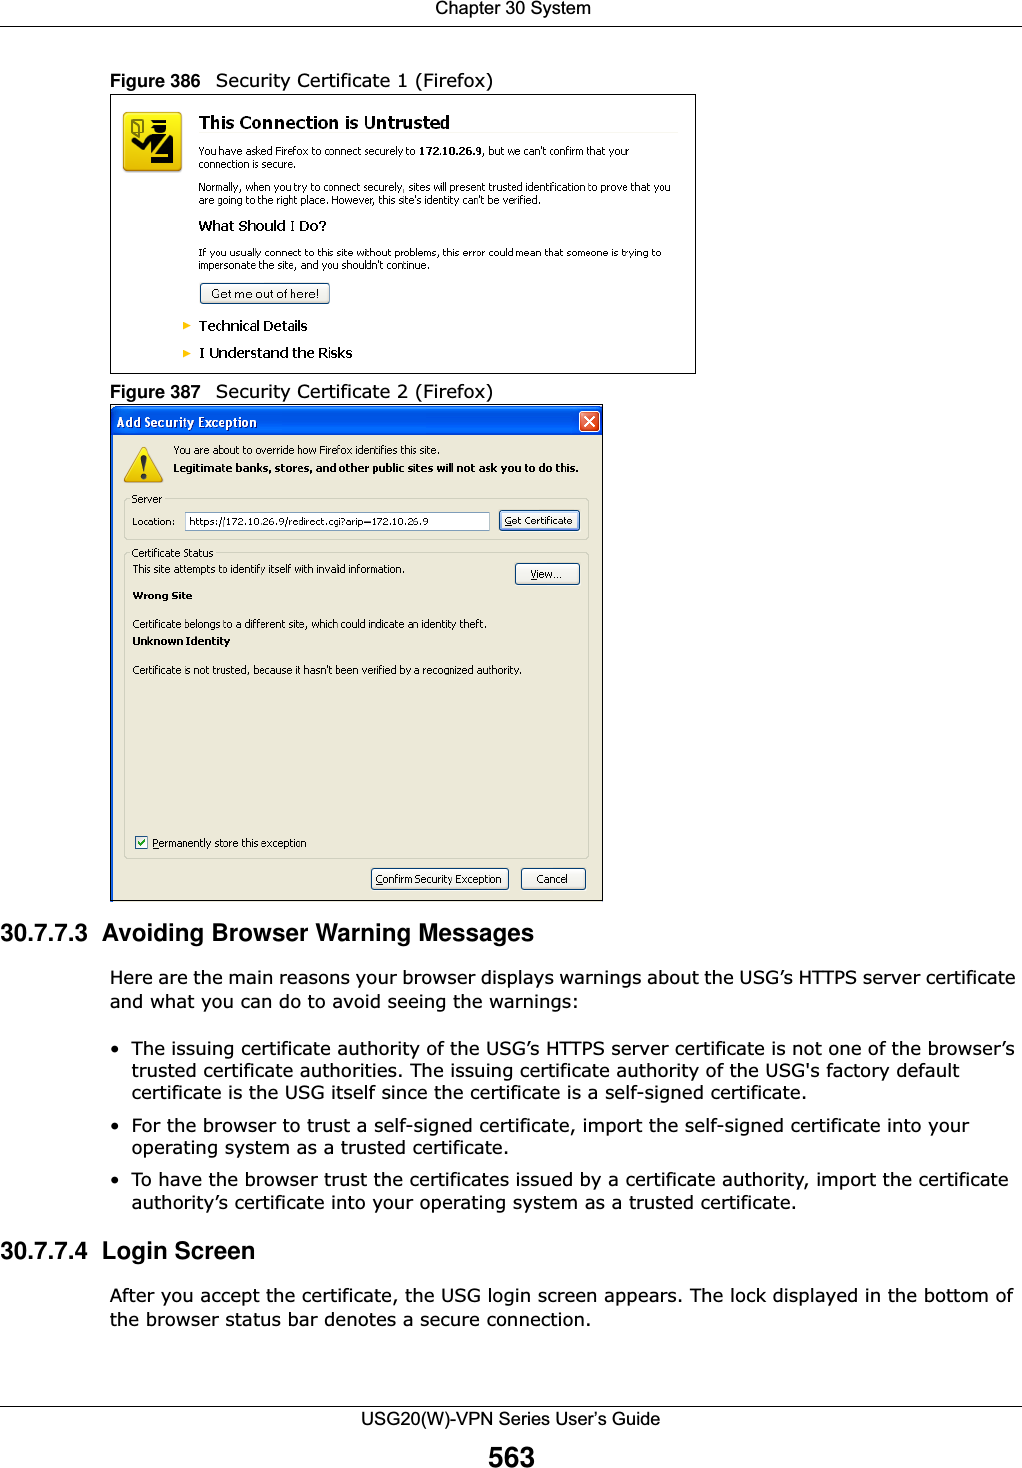  Chapter 30 SystemUSG20(W)-VPN Series User’s Guide563Figure 386   Security Certificate 1 (Firefox)Figure 387   Security Certificate 2 (Firefox)30.7.7.3  Avoiding Browser Warning MessagesHere are the main reasons your browser displays warnings about the USG’s HTTPS server certificate and what you can do to avoid seeing the warnings:• The issuing certificate authority of the USG’s HTTPS server certificate is not one of the browser’s trusted certificate authorities. The issuing certificate authority of the USG&apos;s factory default certificate is the USG itself since the certificate is a self-signed certificate.• For the browser to trust a self-signed certificate, import the self-signed certificate into your operating system as a trusted certificate.• To have the browser trust the certificates issued by a certificate authority, import the certificate authority’s certificate into your operating system as a trusted certificate.30.7.7.4  Login ScreenAfter you accept the certificate, the USG login screen appears. The lock displayed in the bottom of the browser status bar denotes a secure connection.